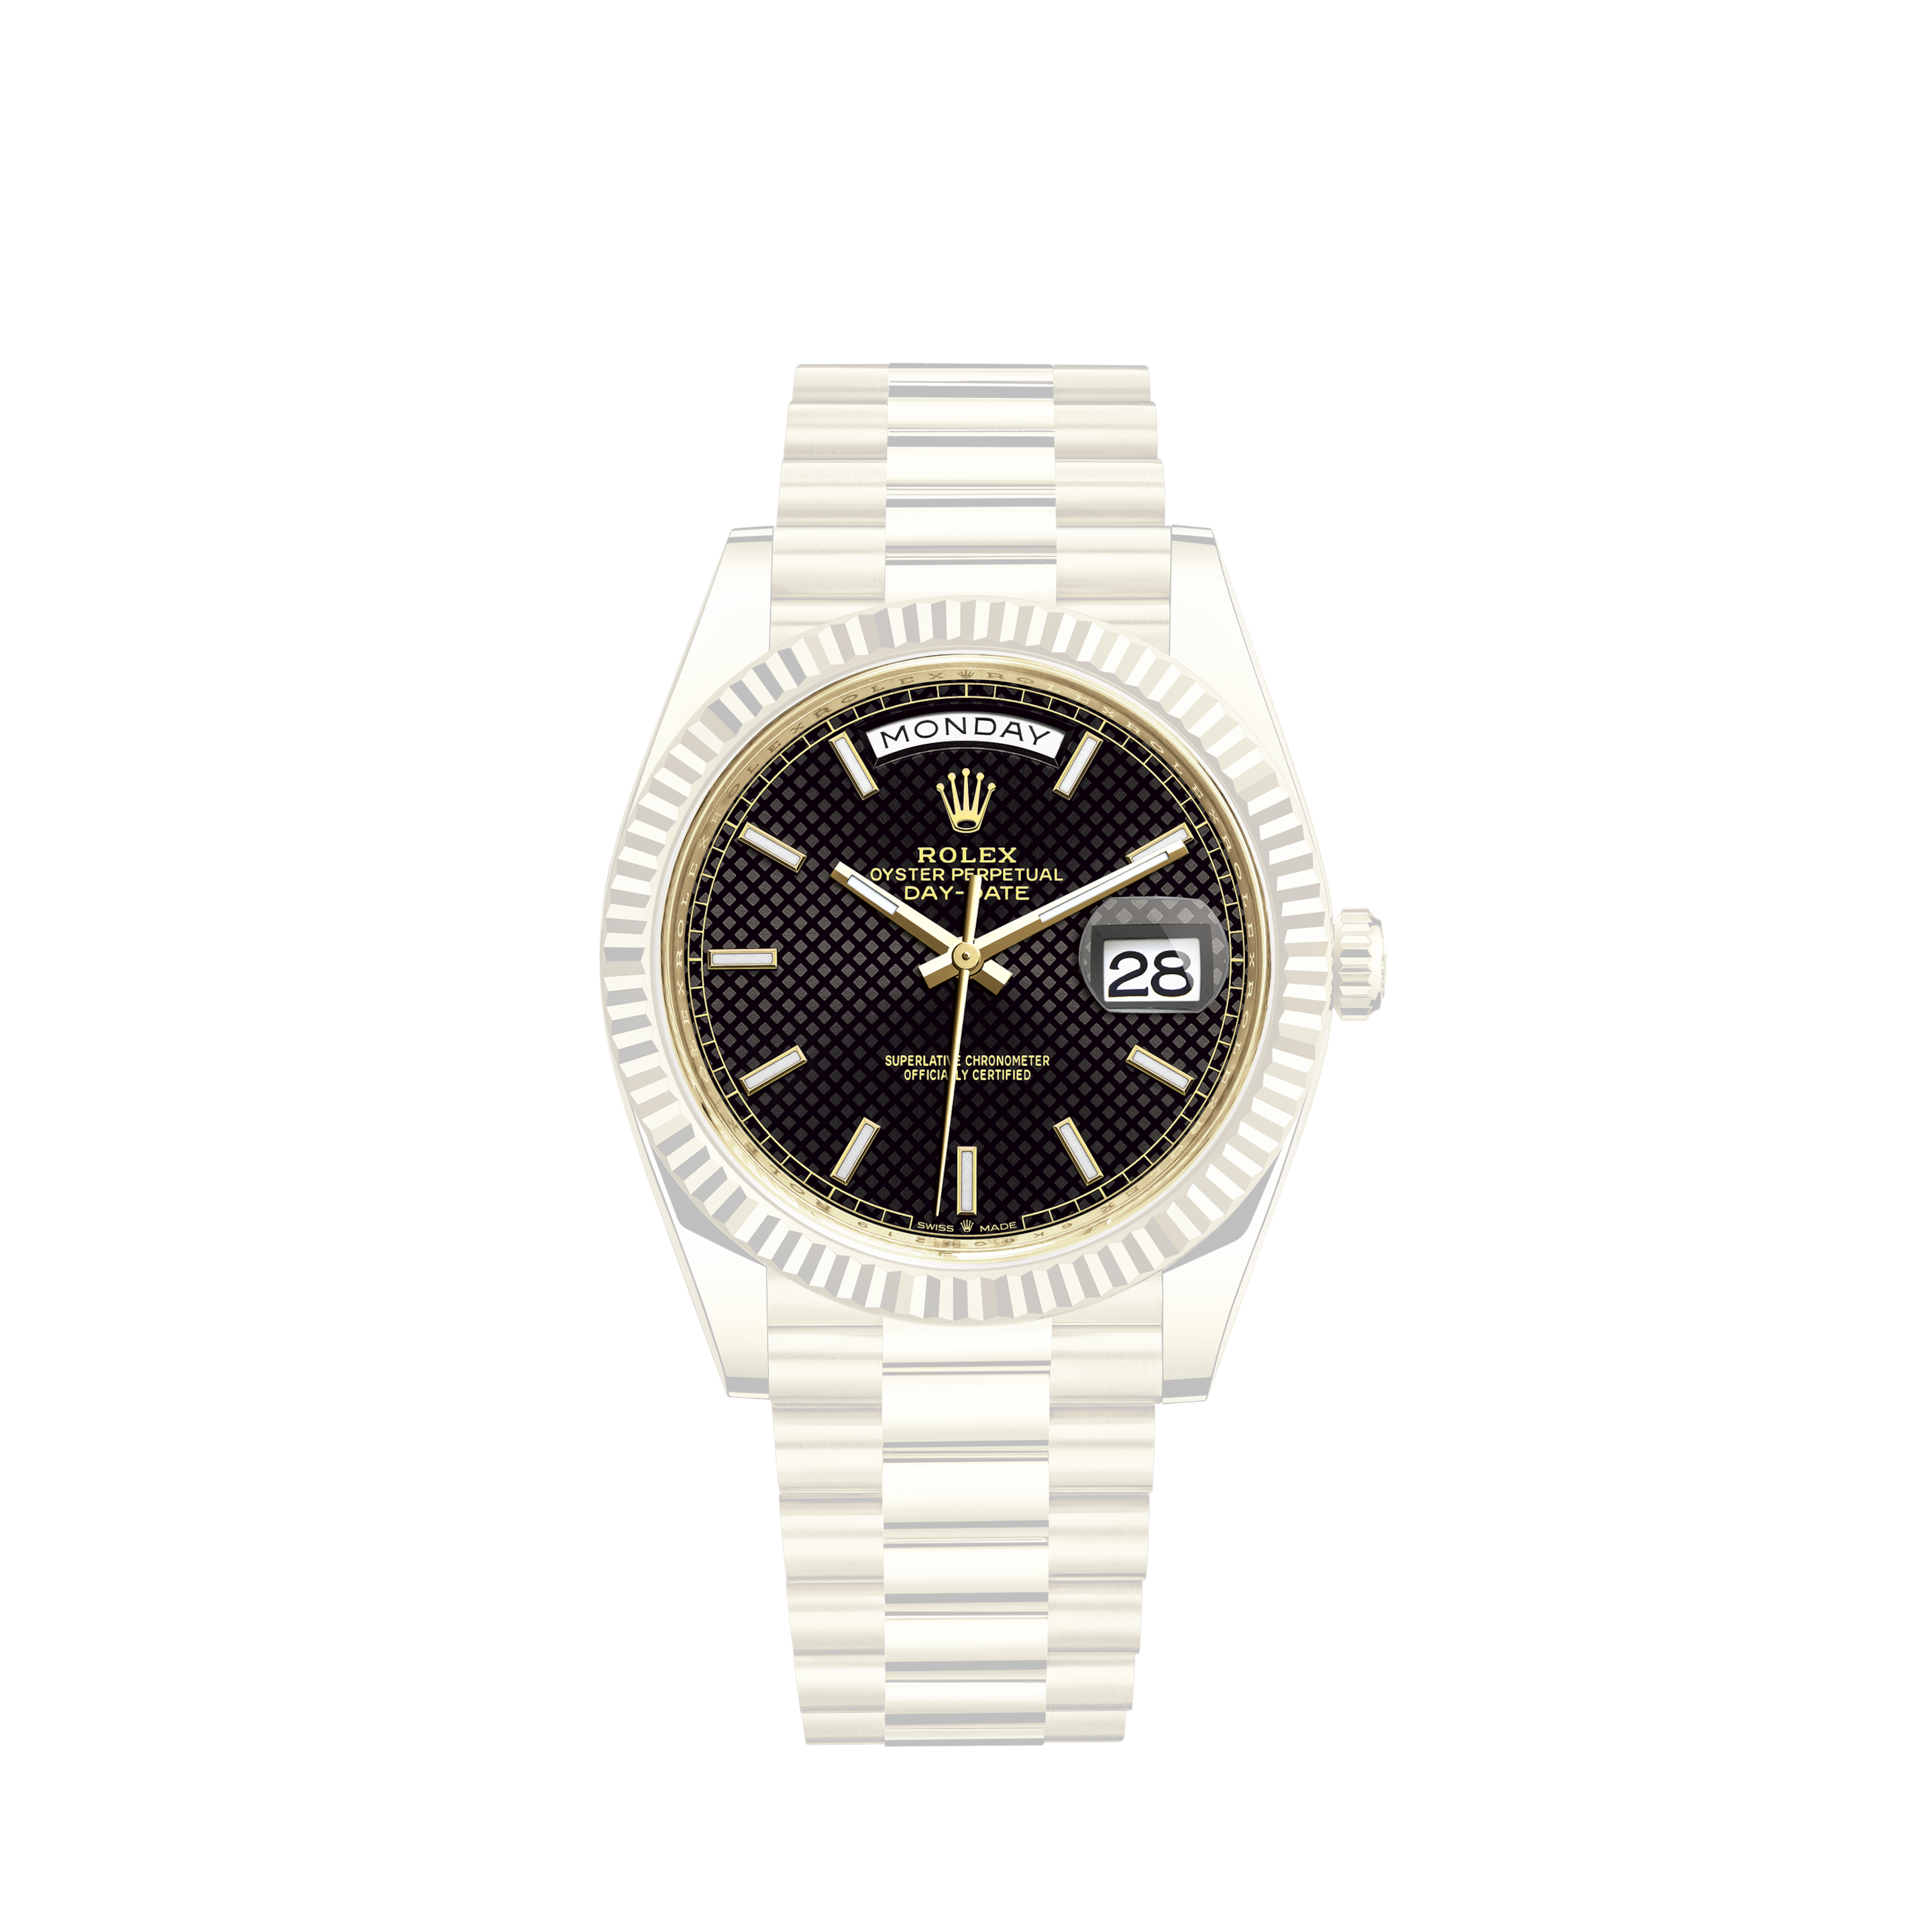 Rolex Oyster Perpetual Datejust 1601 Open Leaf HandsRolex Oyster Perpetual Datejust 16013 Mens Watch